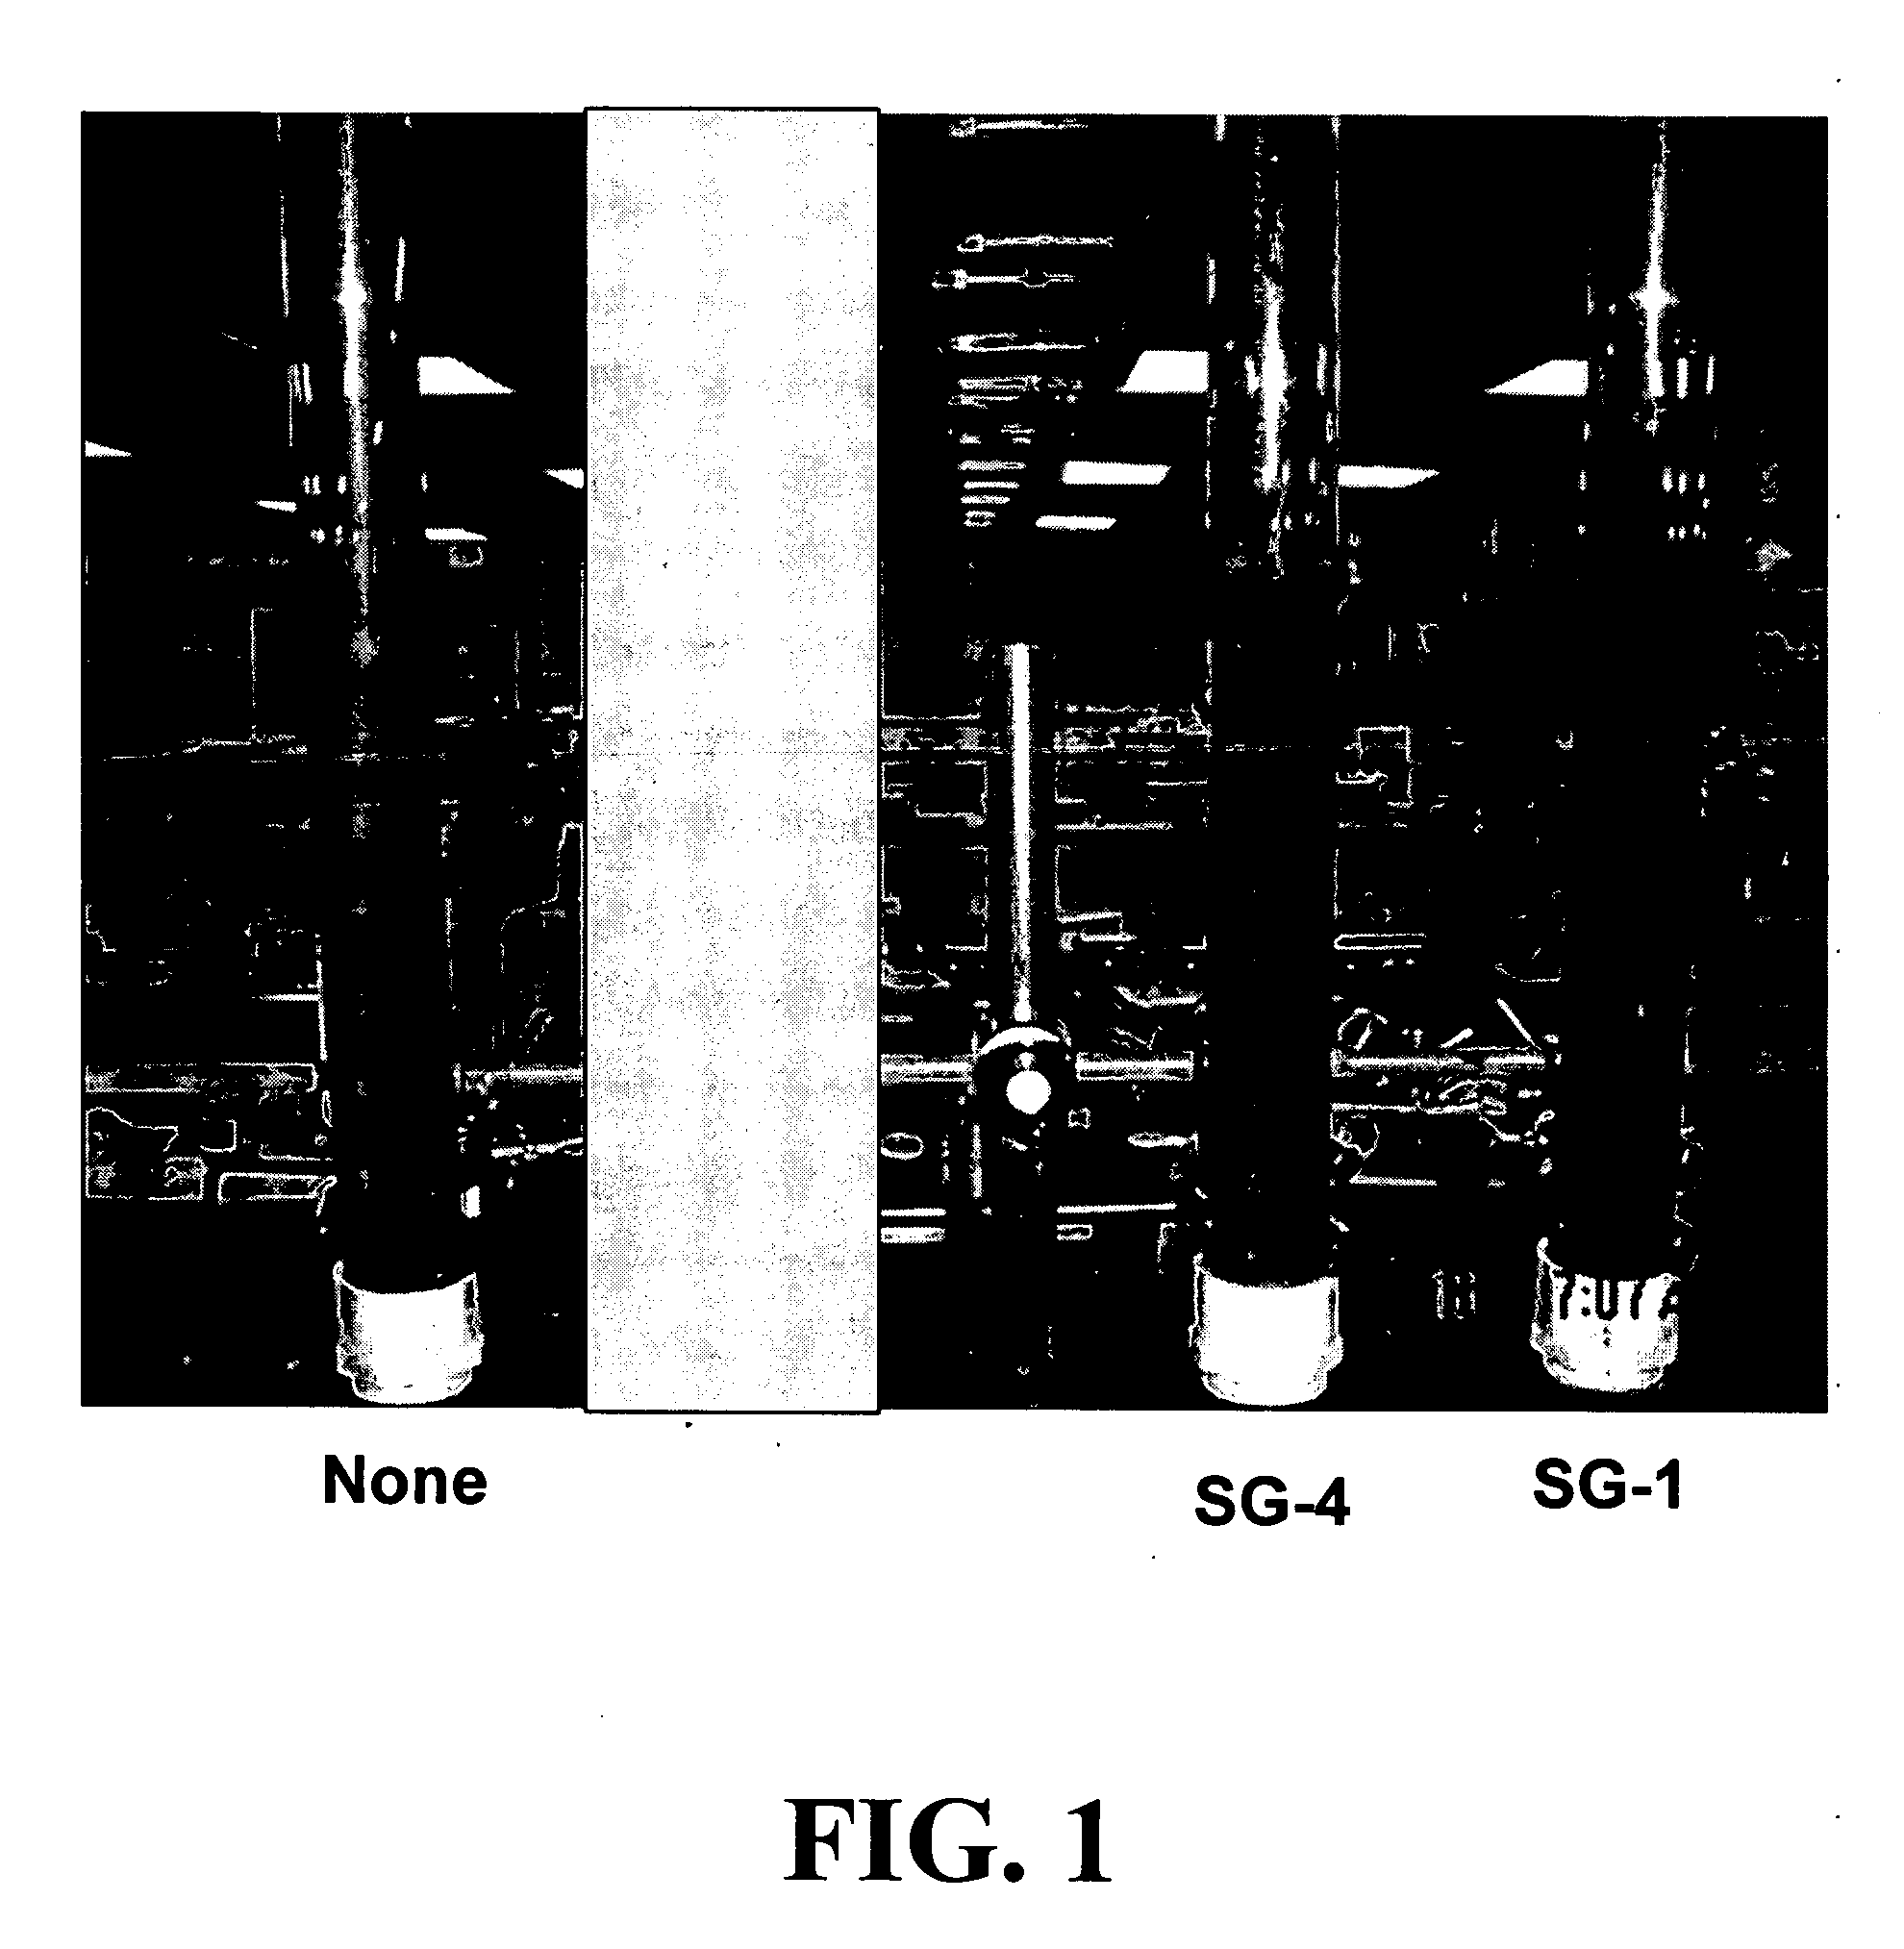 Aggregating reagents, modified particulate metal-oxides, and methods for making and using same